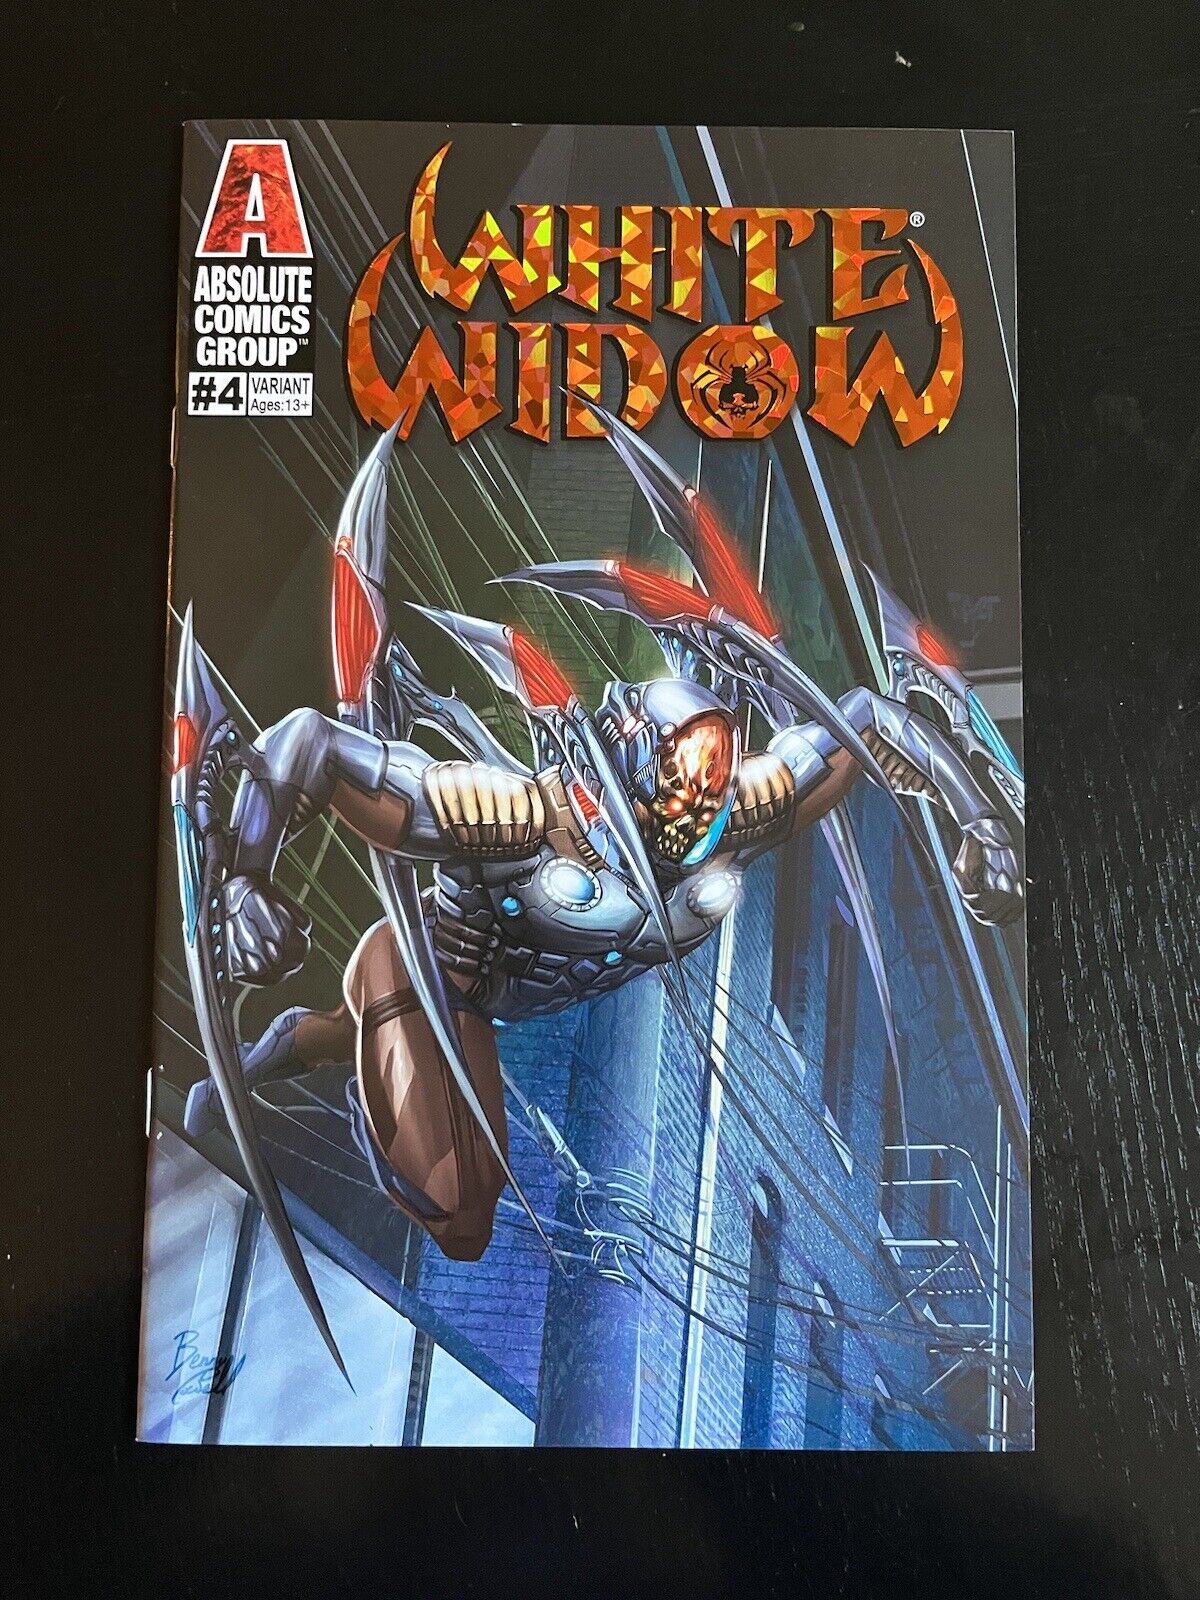 White Widow #4 - (2020) - Recluse Unbound Variant - Absolute Comics - VF/NM